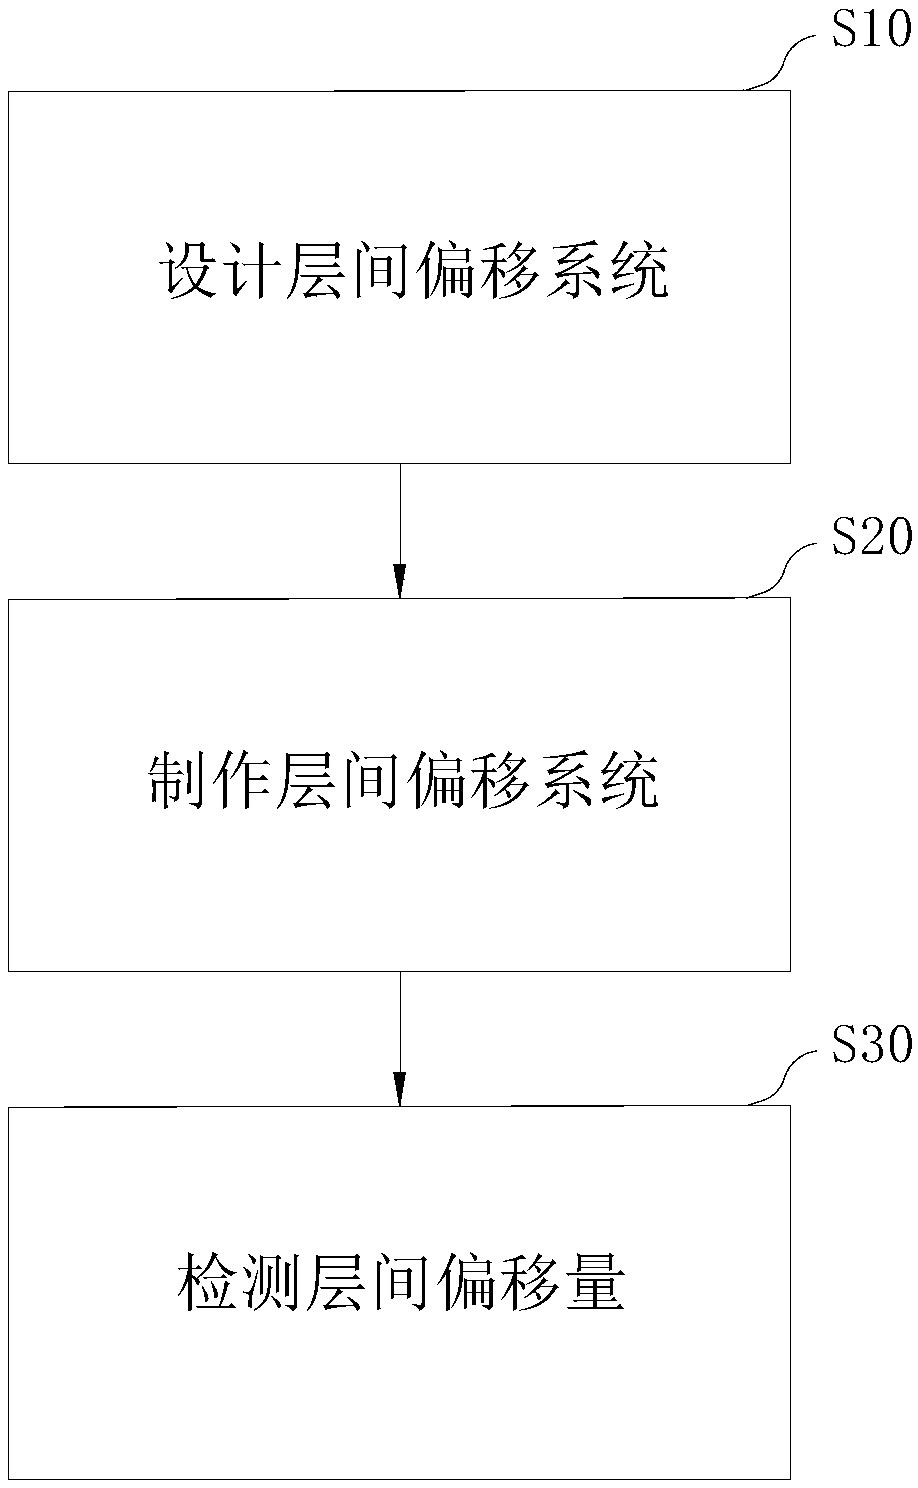 Multi-layer board interlayer offset detection method and detection system